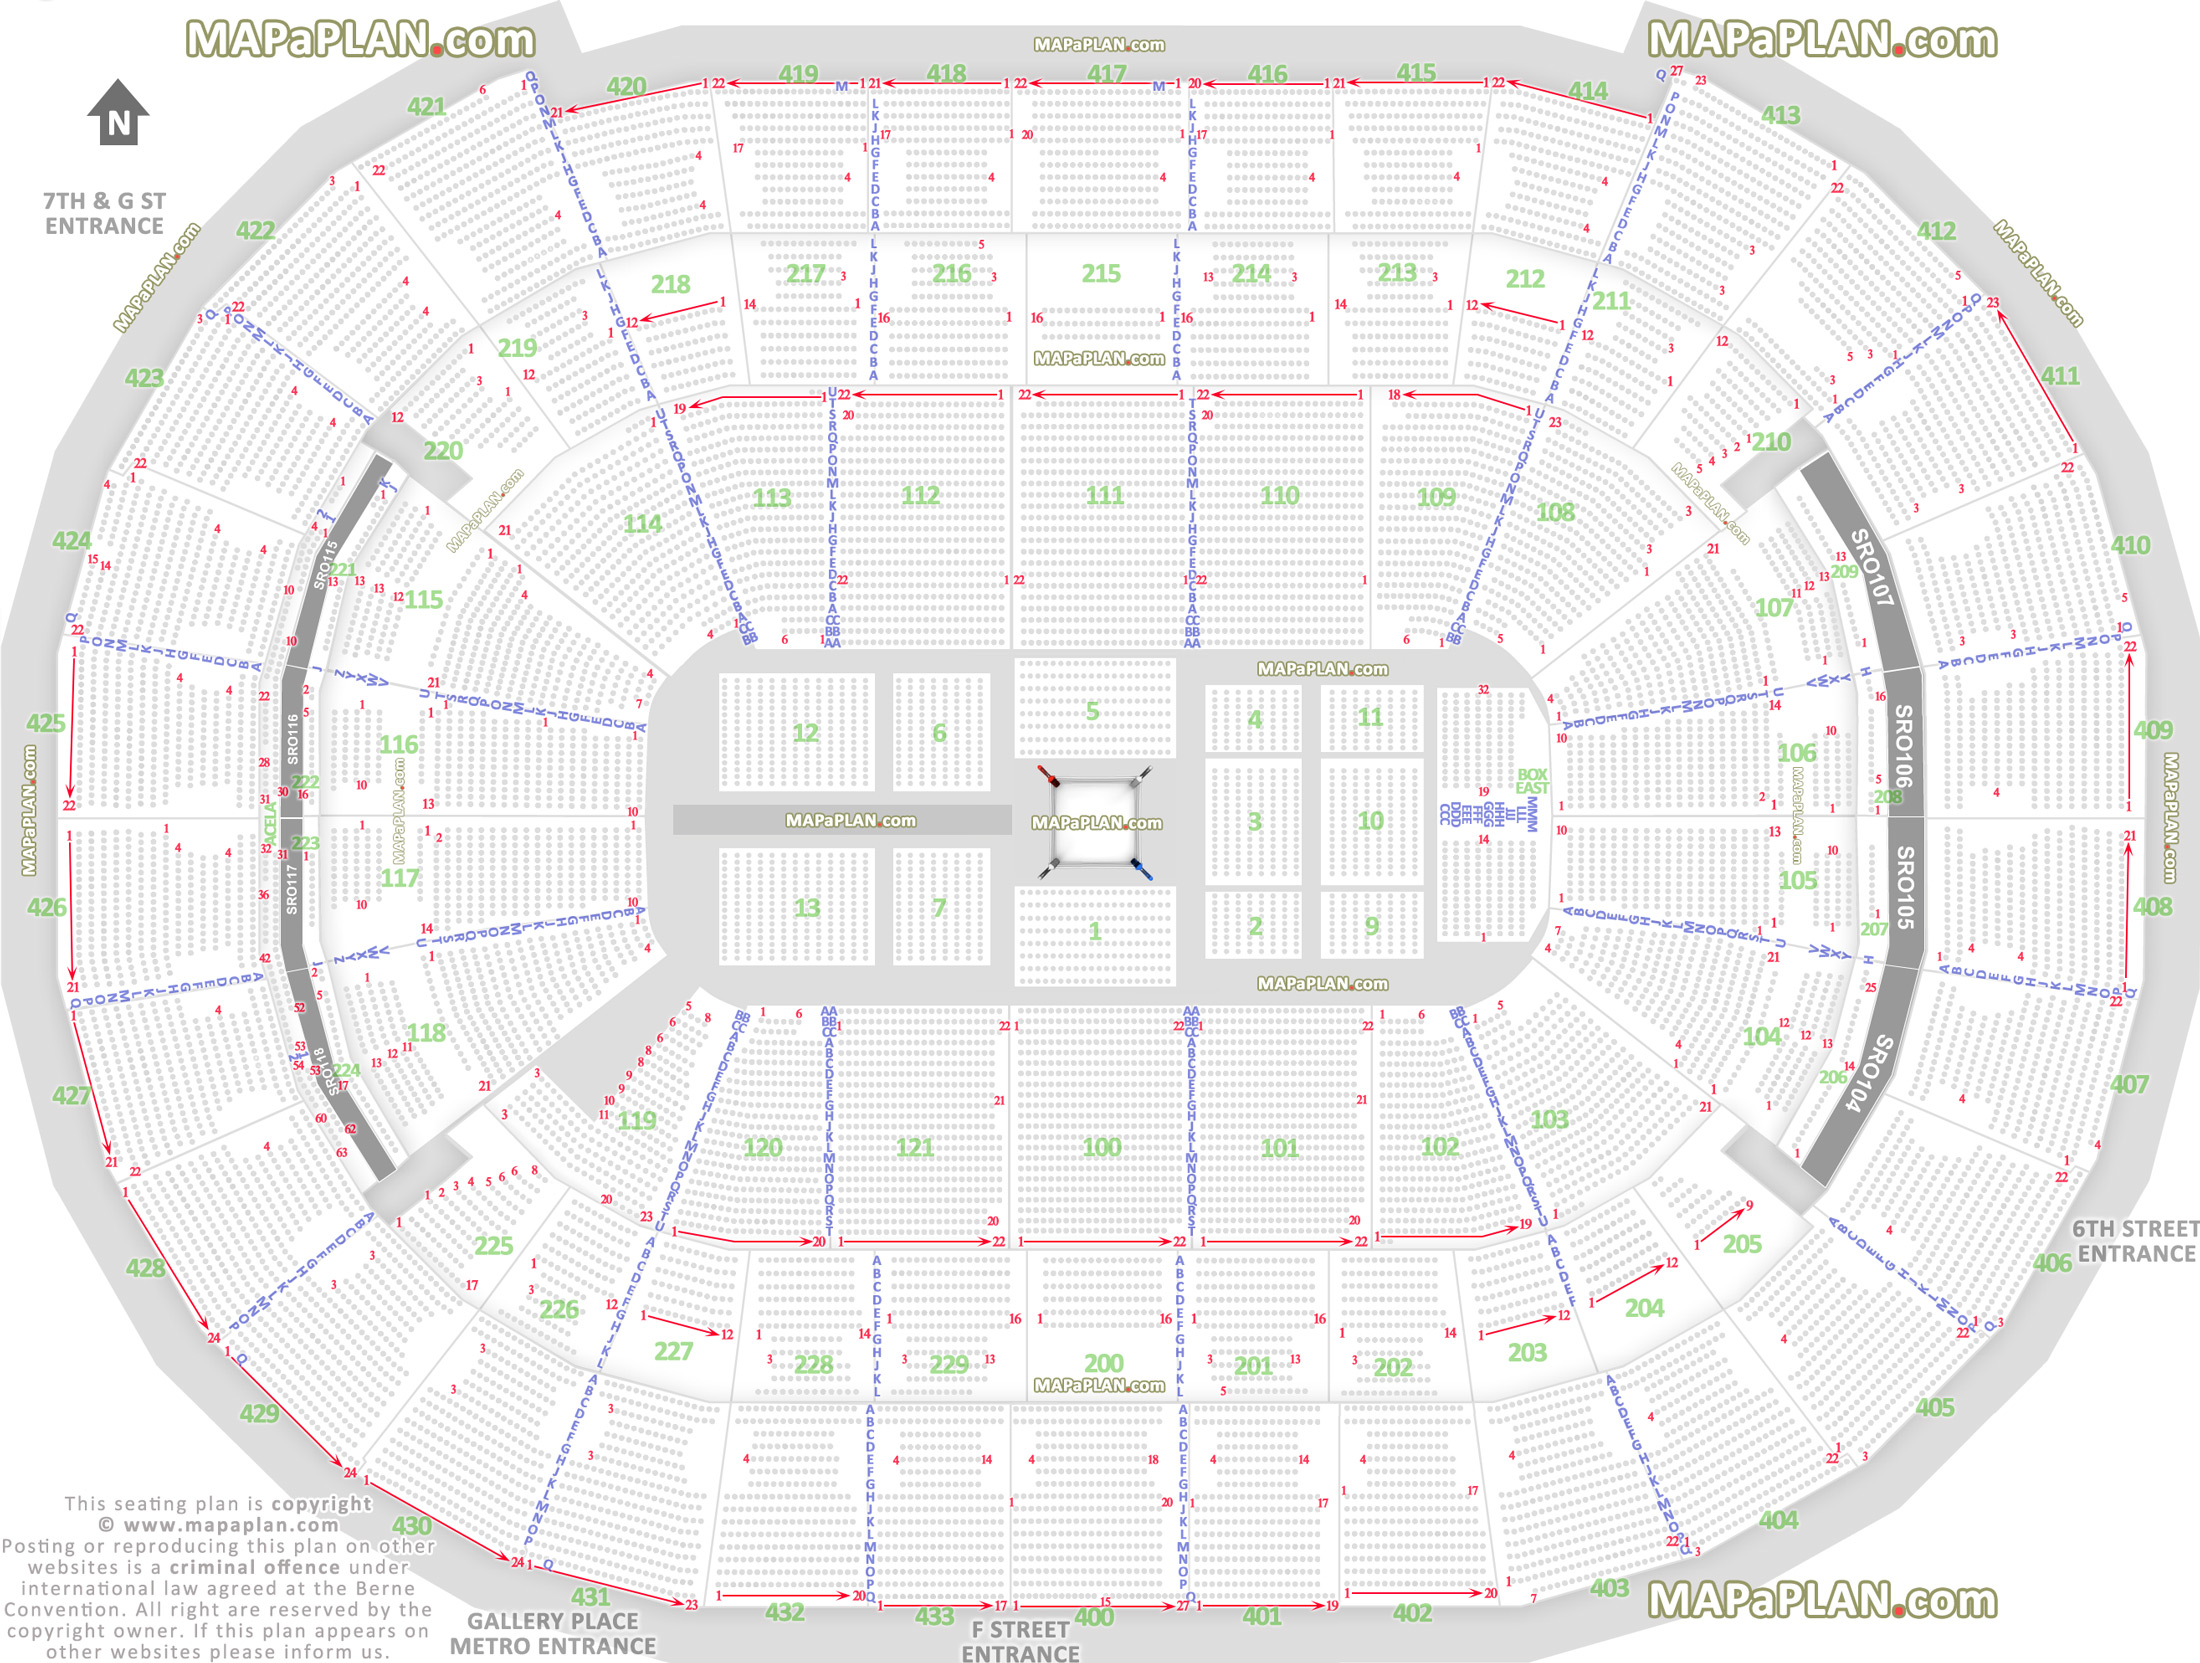 wwe live wrestling boxing events ring configuration row letters good bad seats Washington DC Verizon Center seating chart